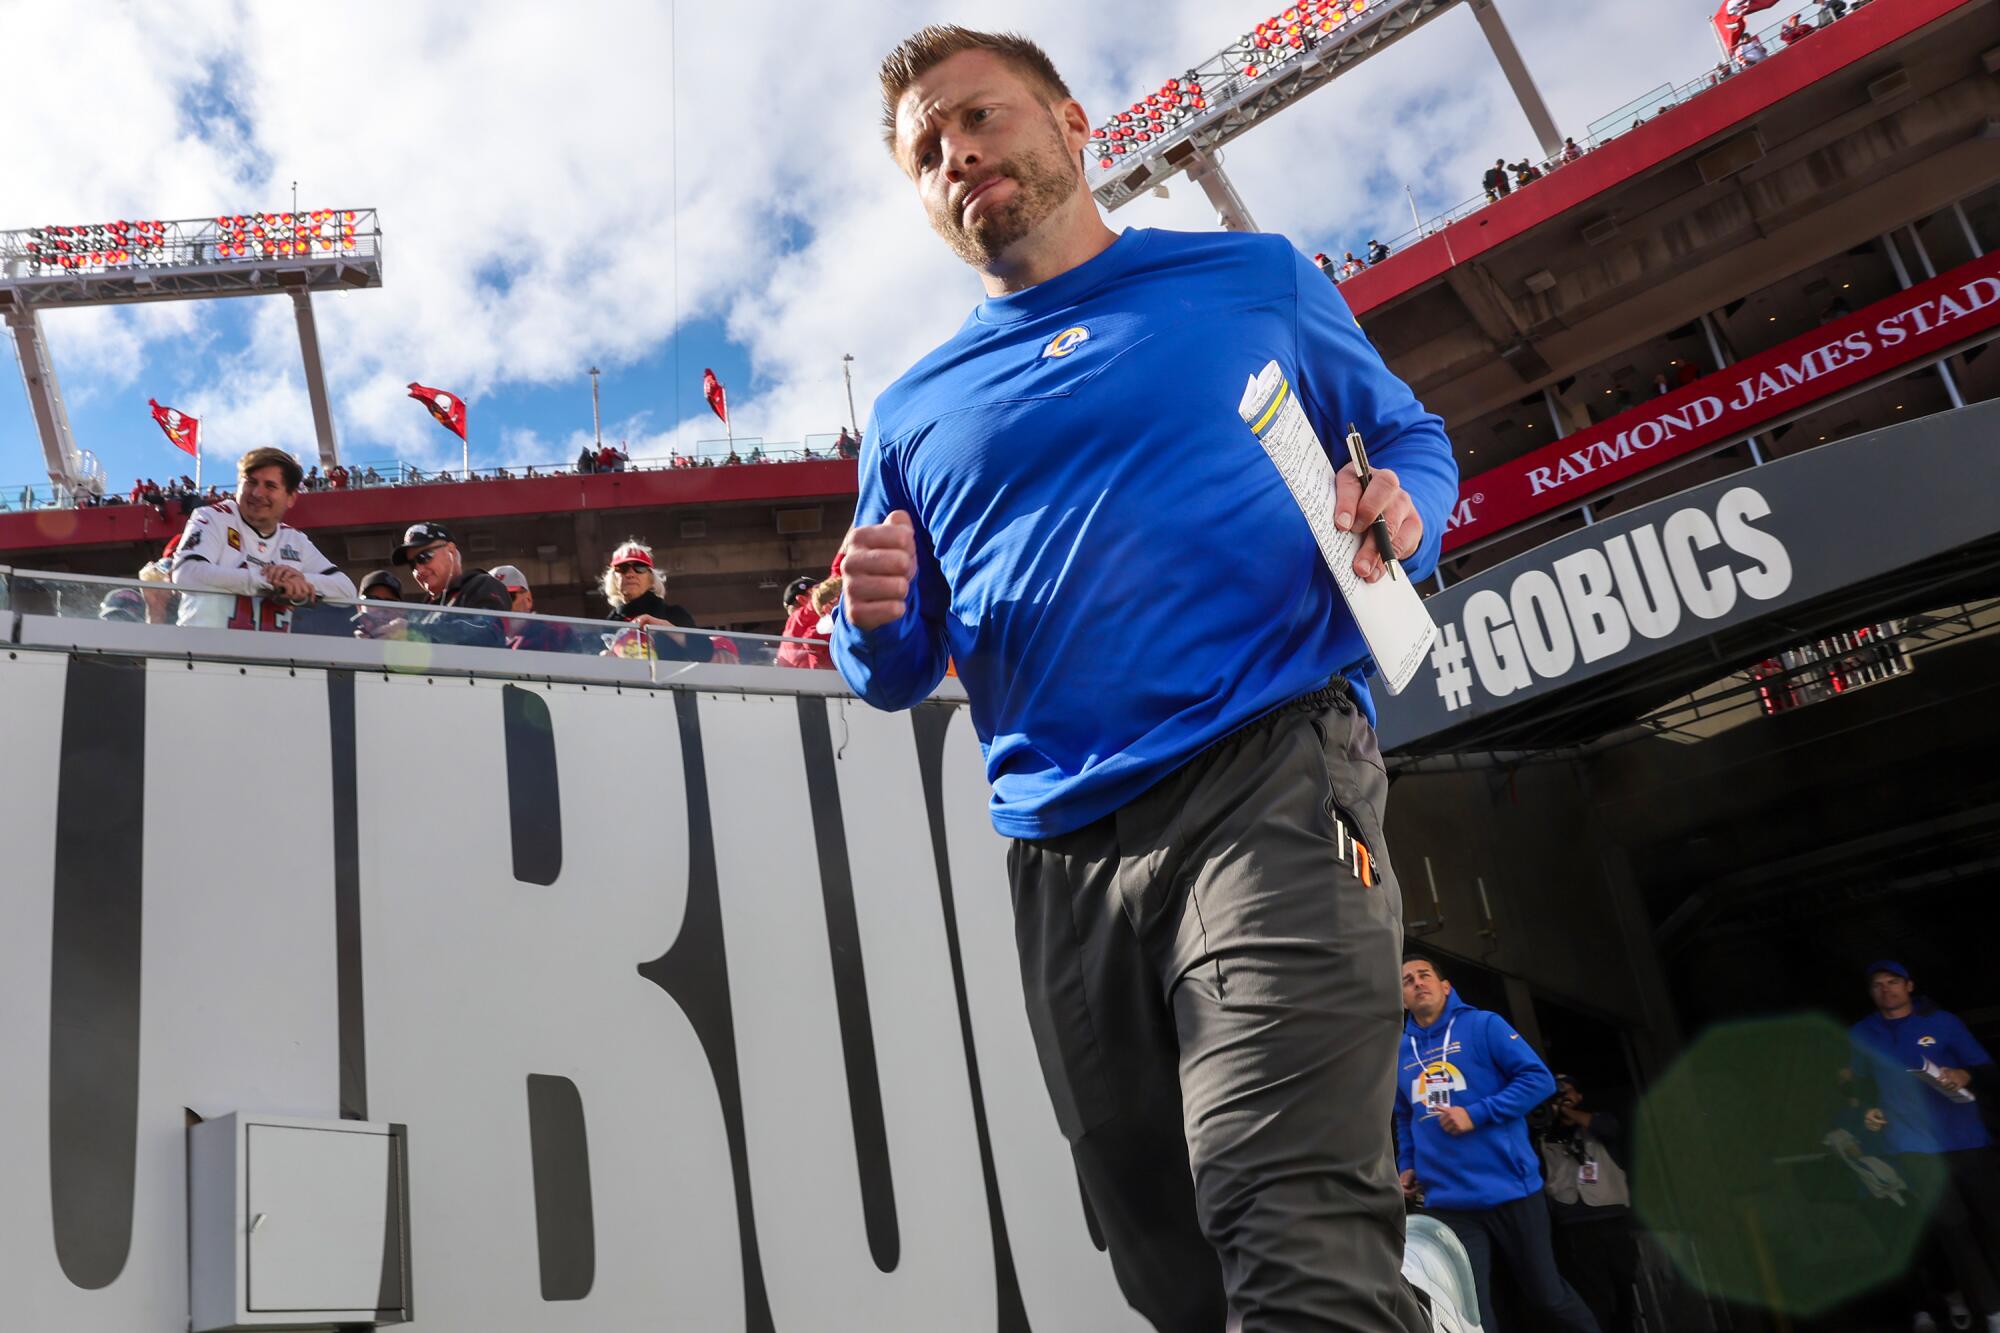 Rams coach Sean McVay runs onto the field before a playoff game against the Tampa Bay Buccaneers.